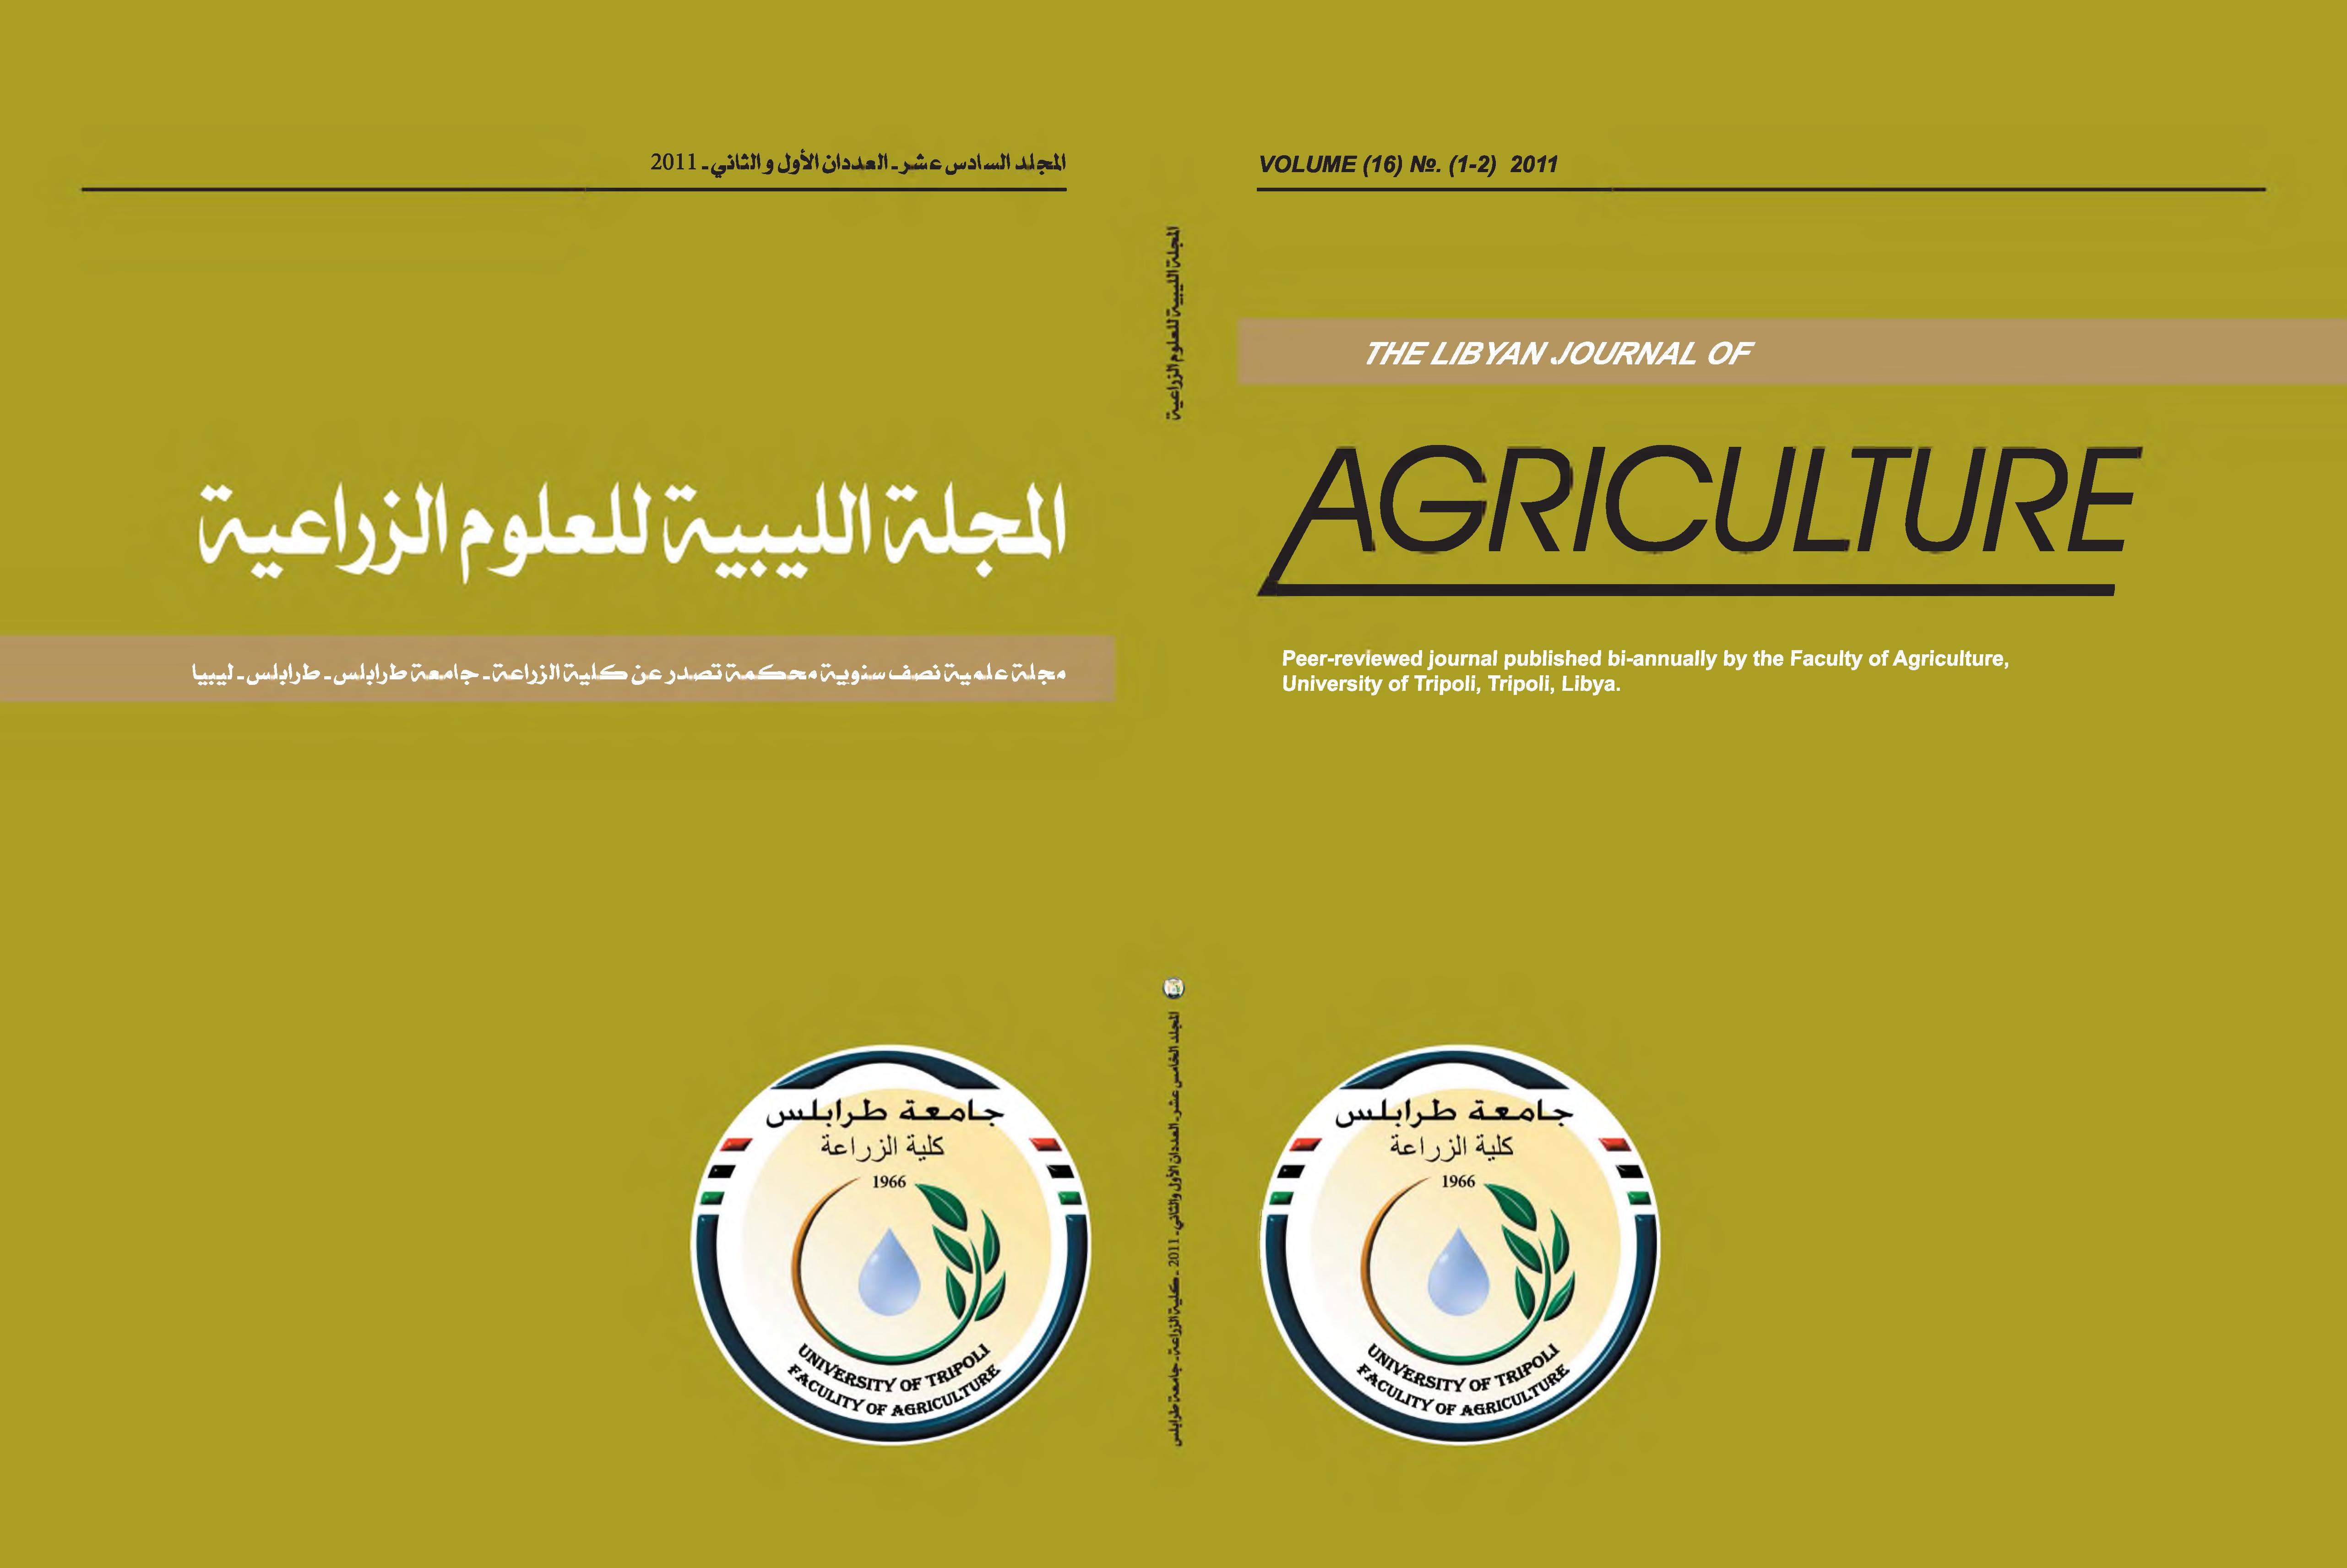 					View Vol. 18 No. 1-2 (2013): The Libyan Journal of Agriculture
				